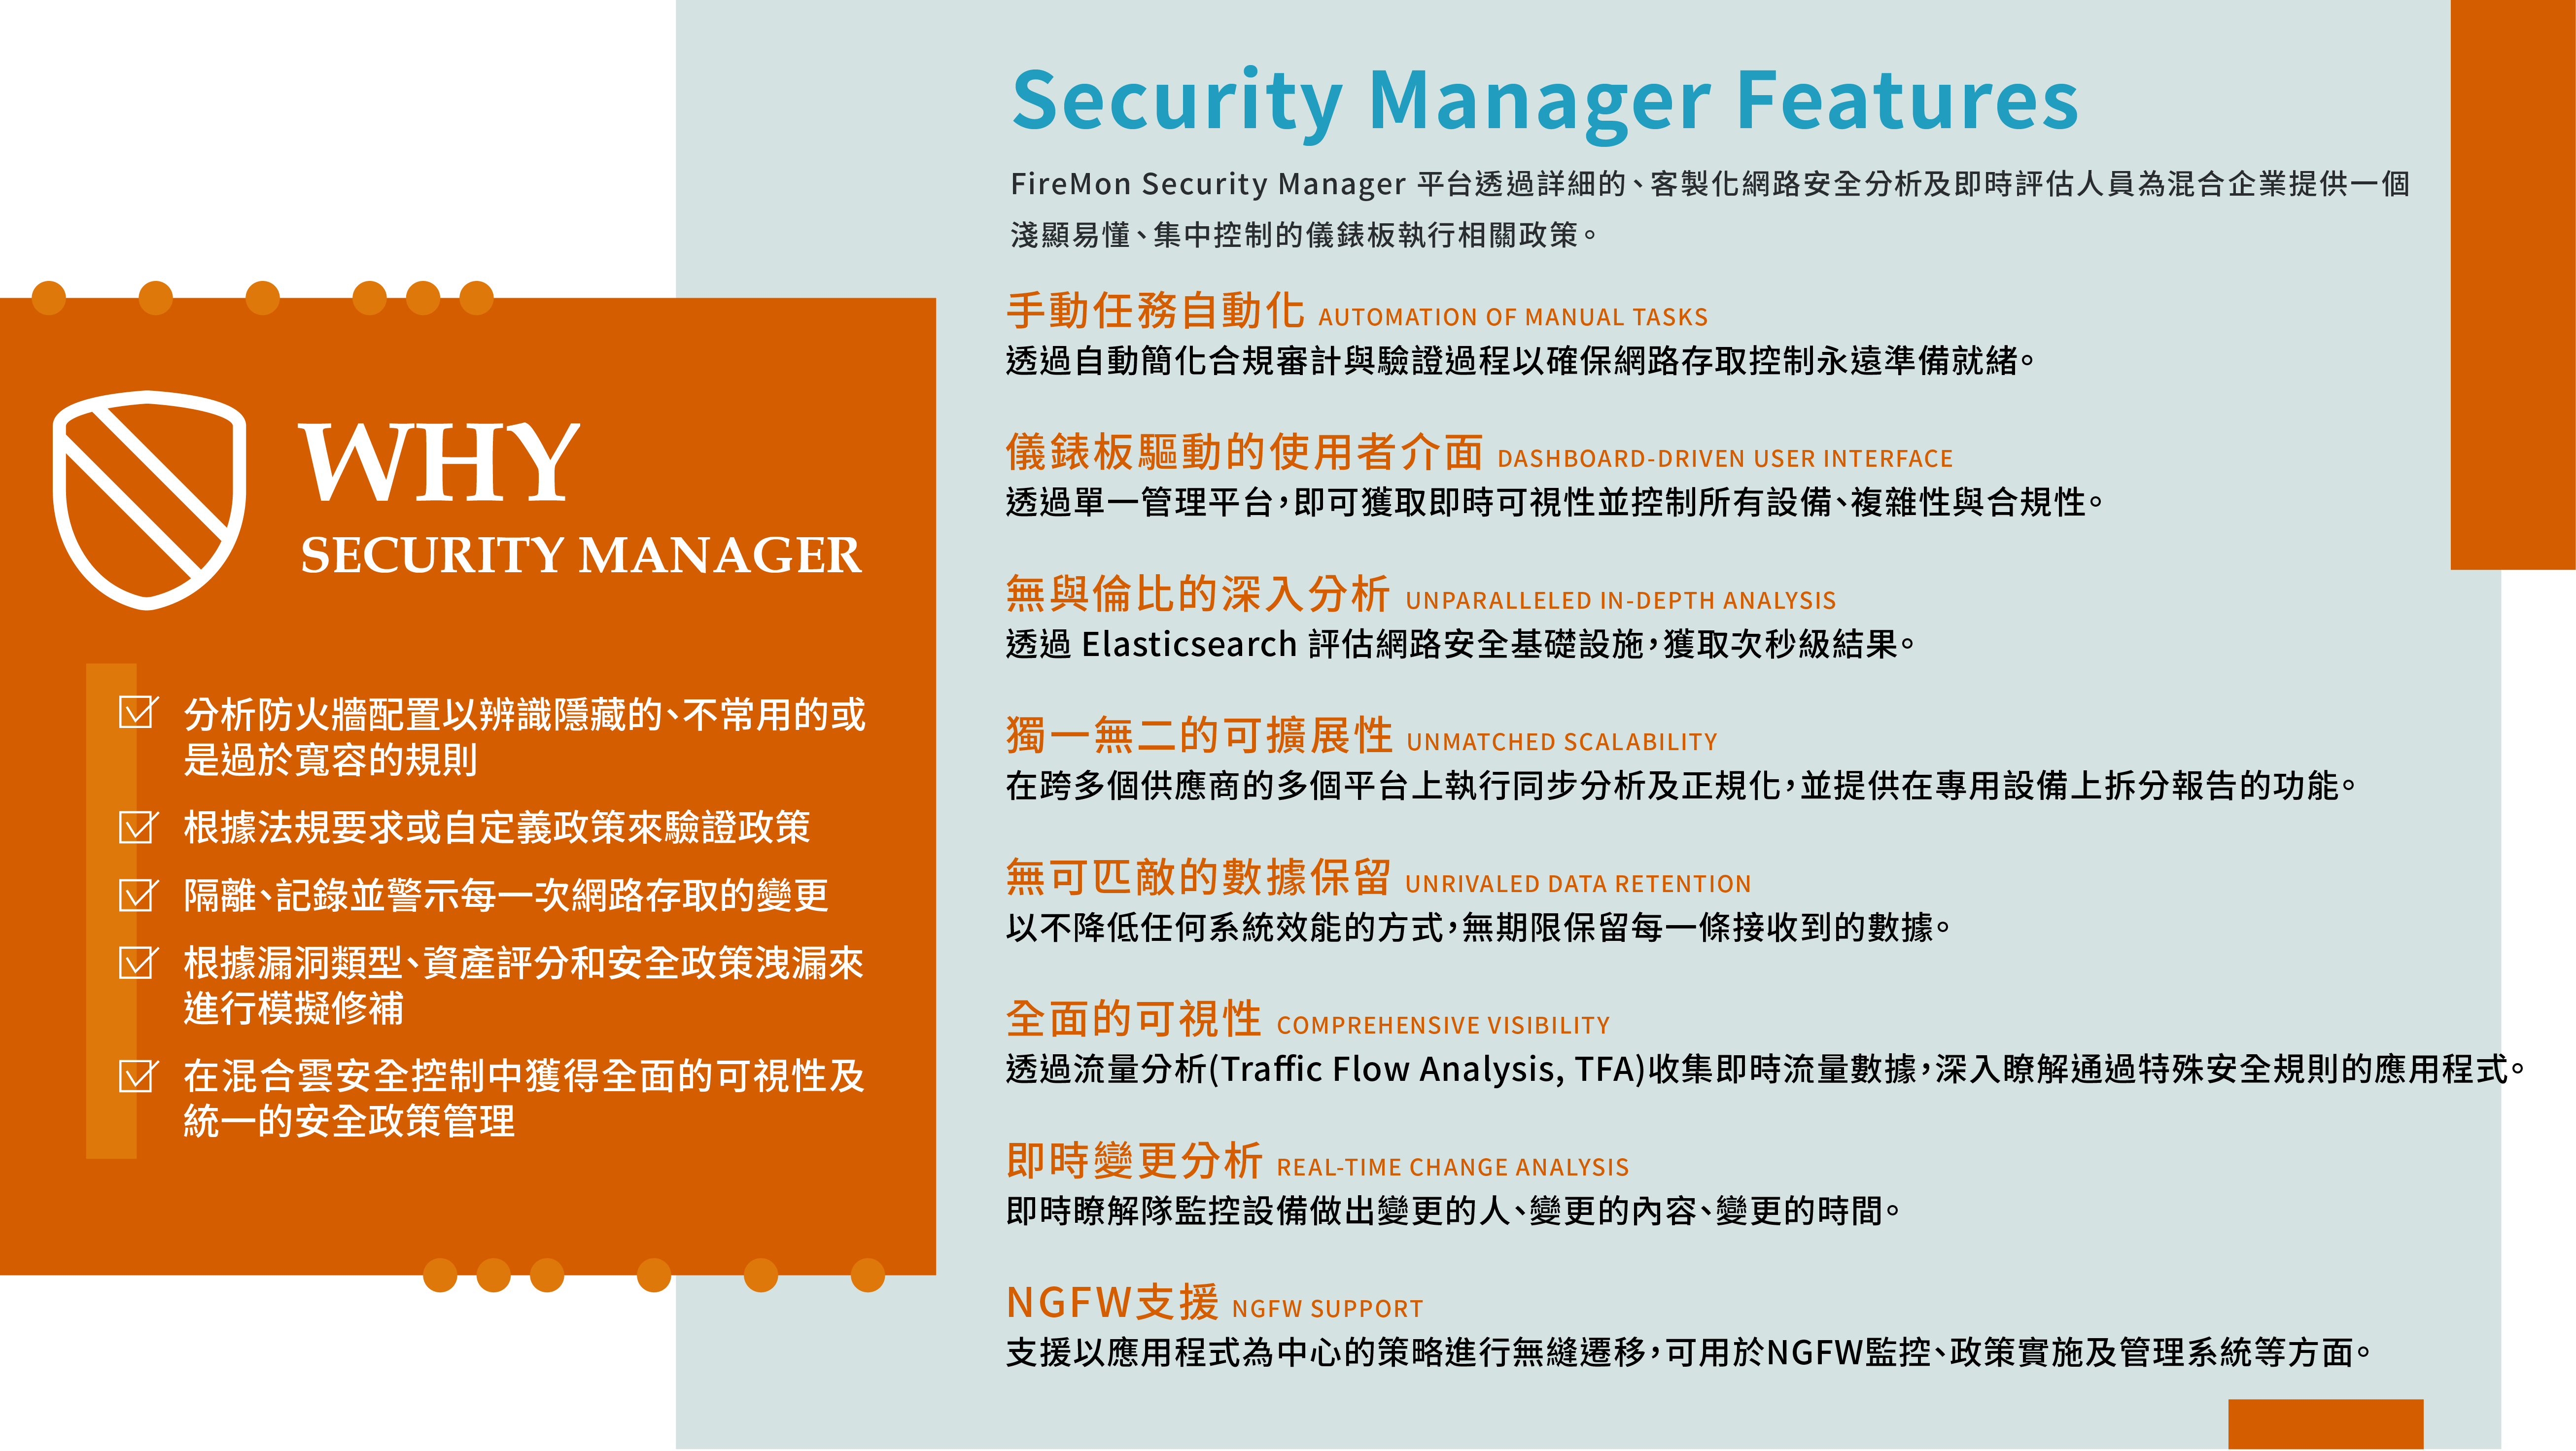 FireMon Security Manager 特點